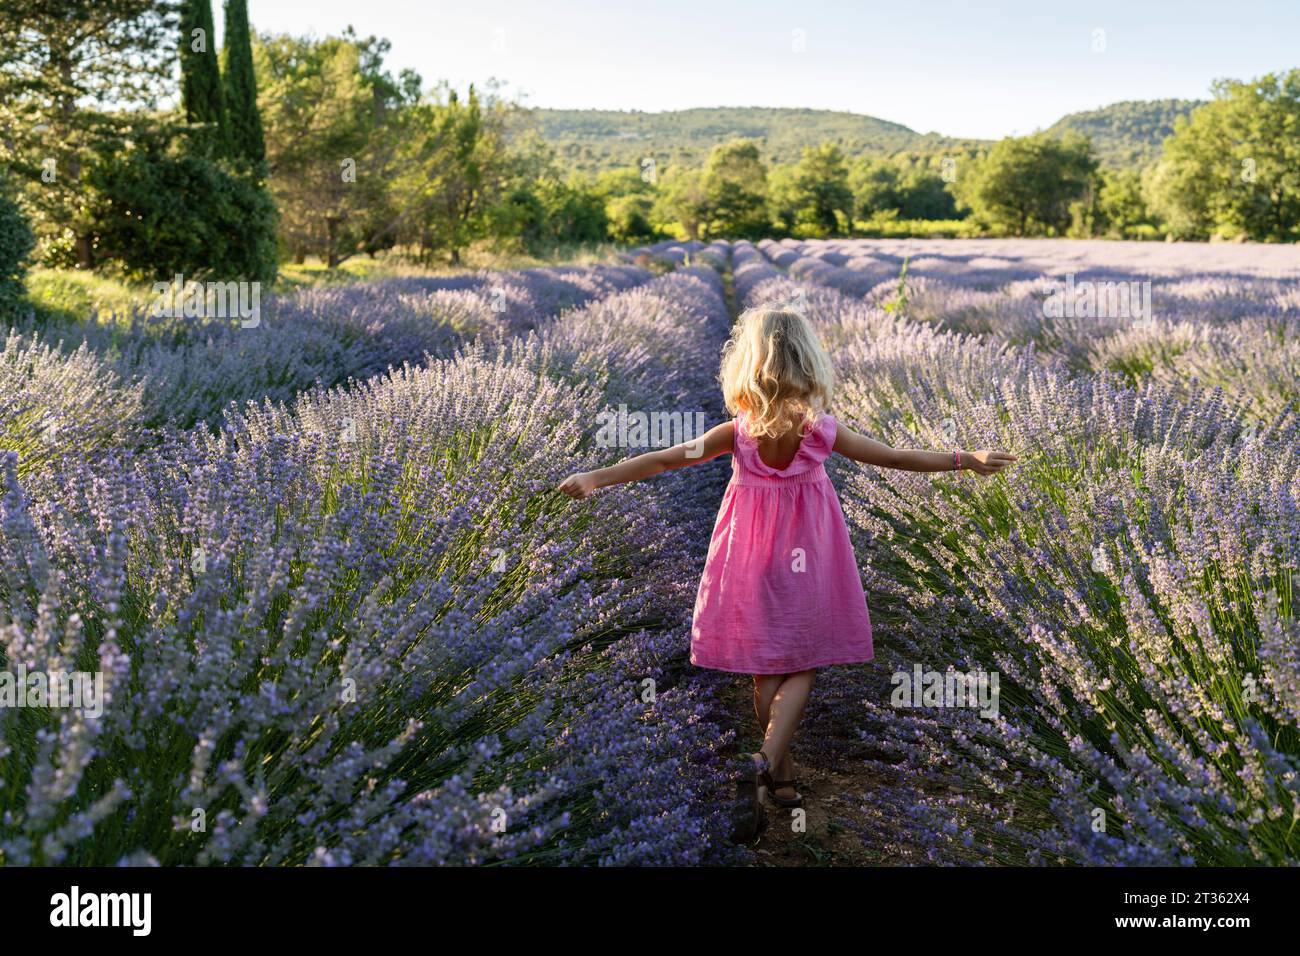 Carefree girl spending leisure time in lavender field Stock Photo